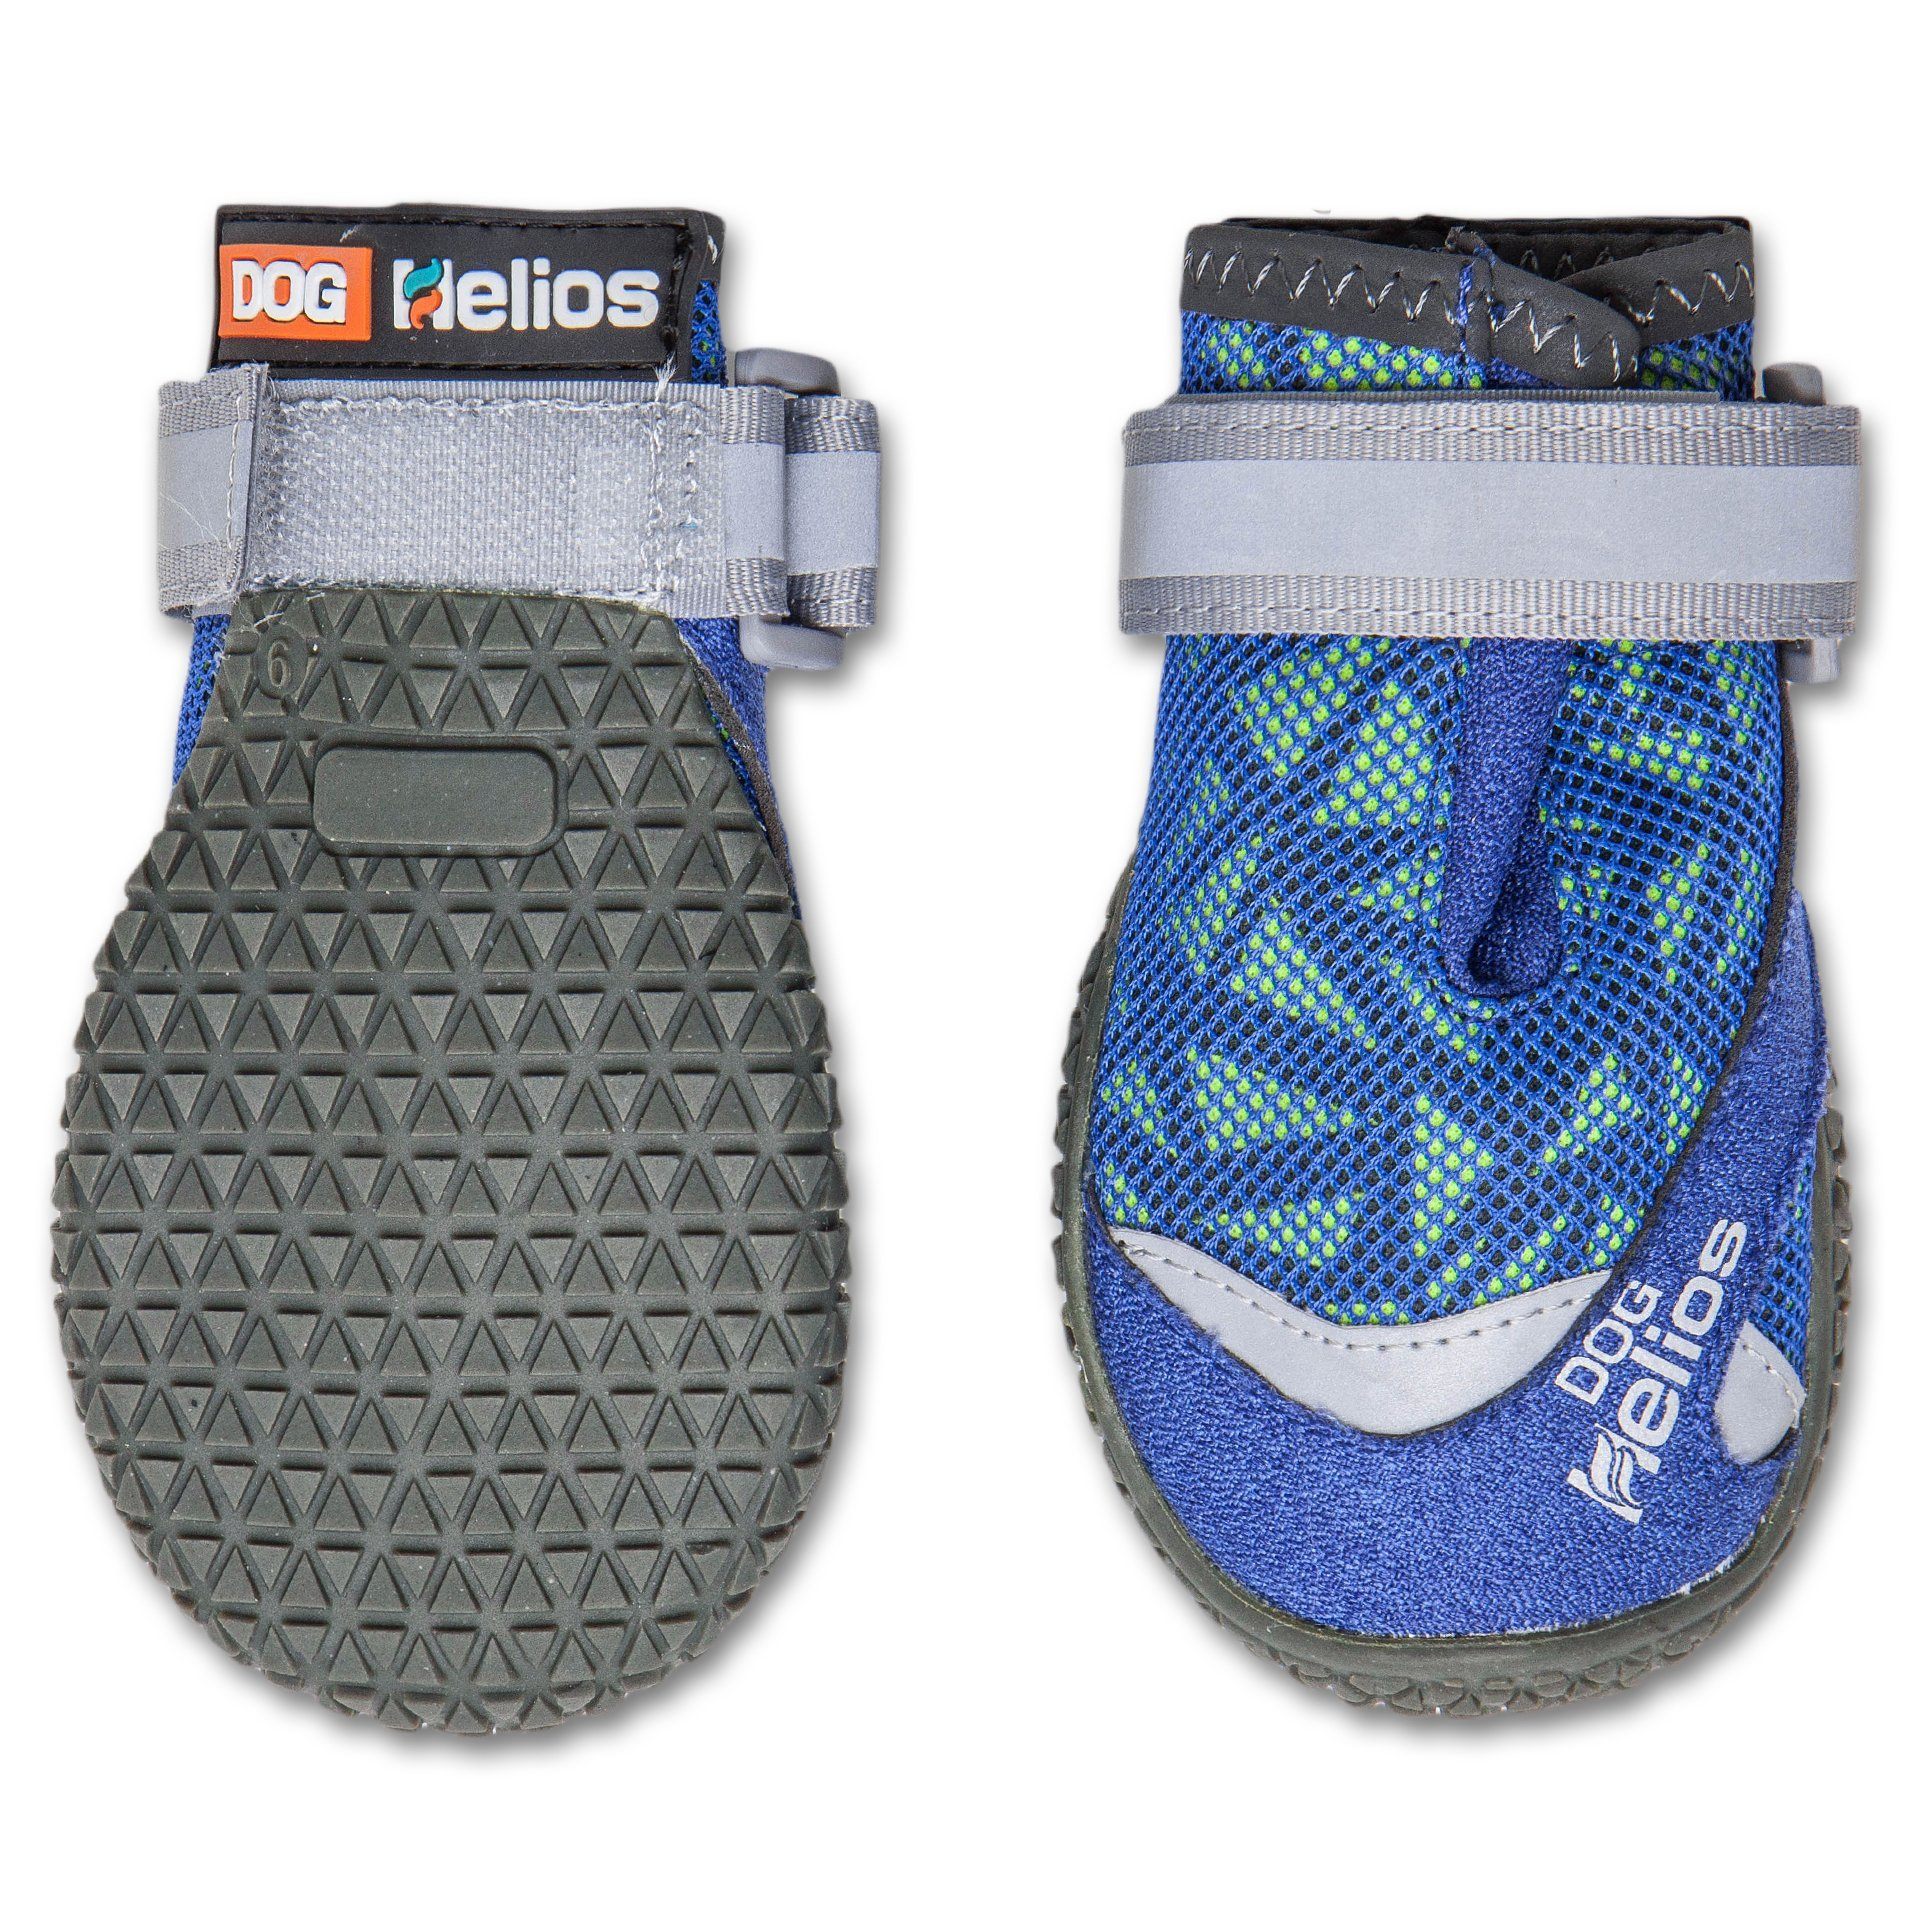 Dog Helios 'Surface' Premium Grip Performance Dog Shoes - Set Of 4 X-Small Blue